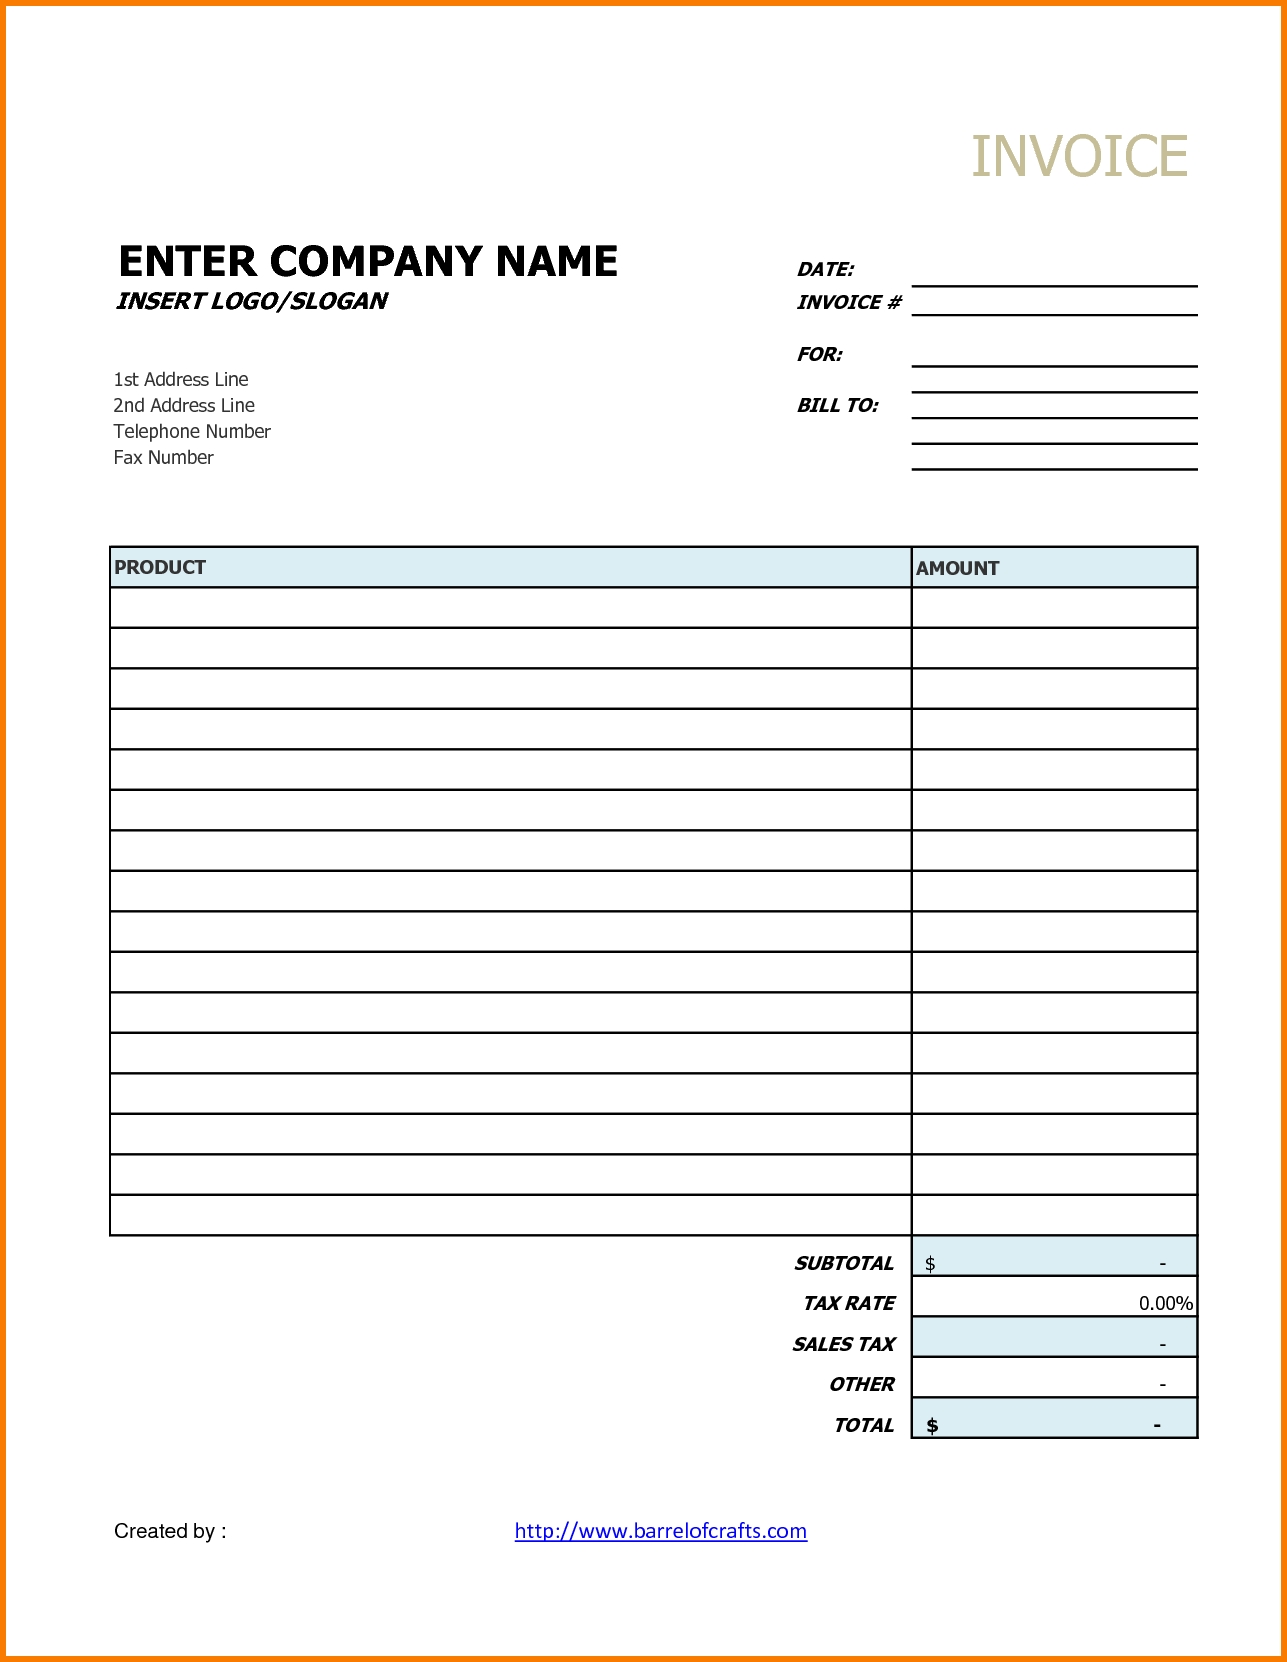 printable invoice template your sourche for printable invoice google docs invoice templates